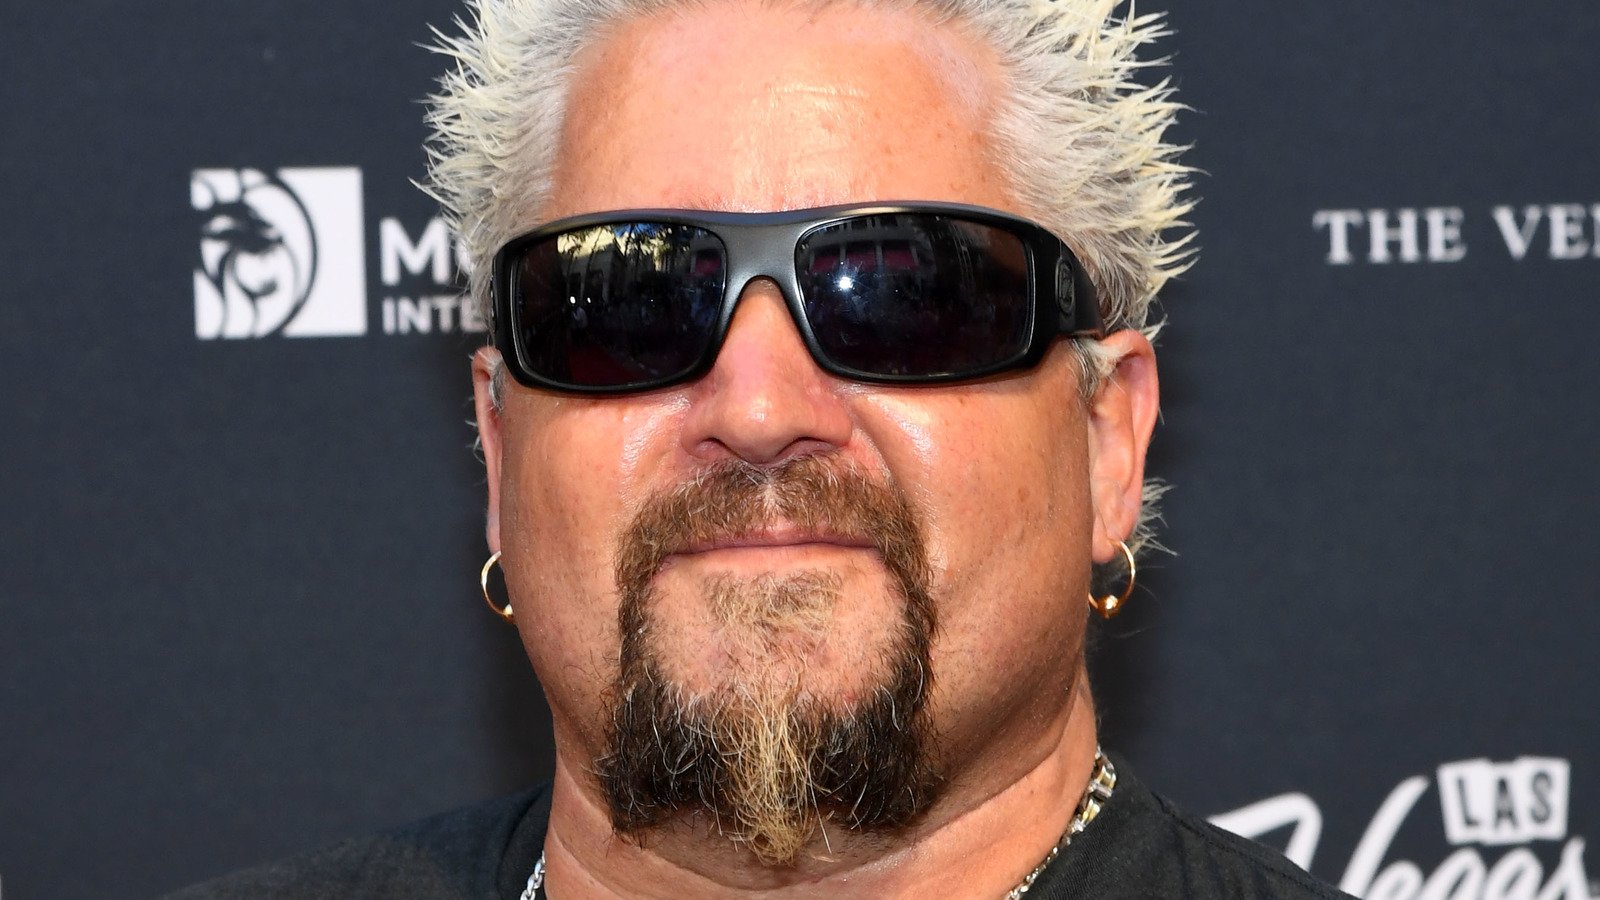 The Real Reason Guy Fieri Got Into Cooking